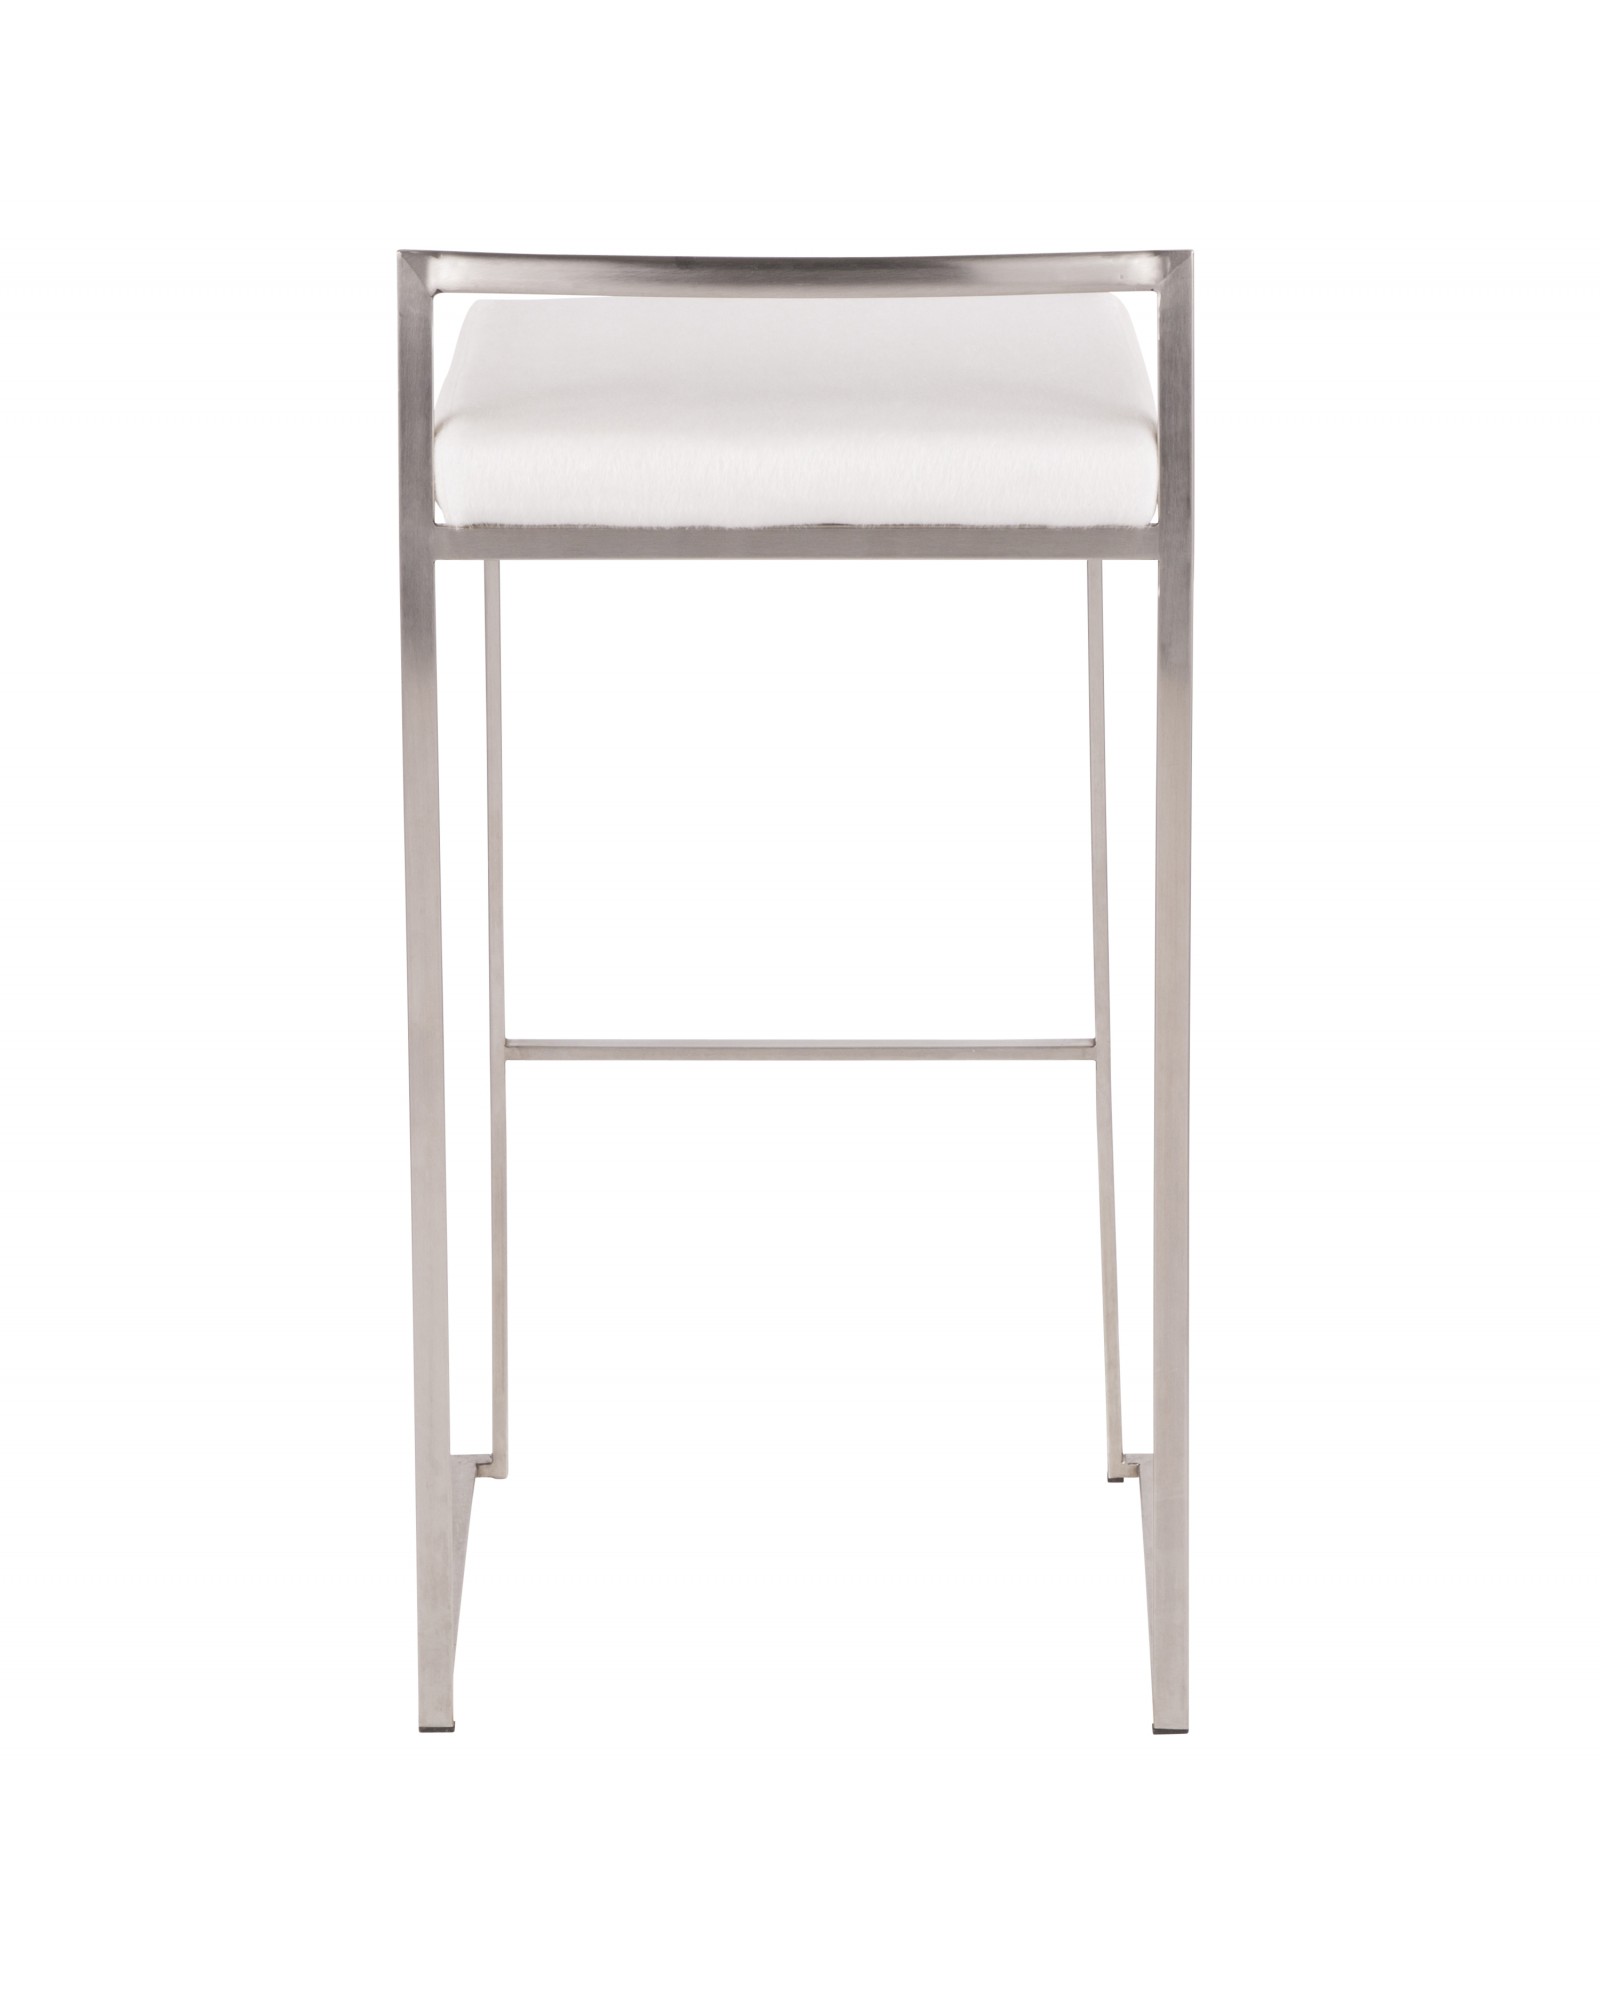 Fuji Contemporary Stackable Barstool in Stainless Steel with White Mohair Cushion - Set of 2